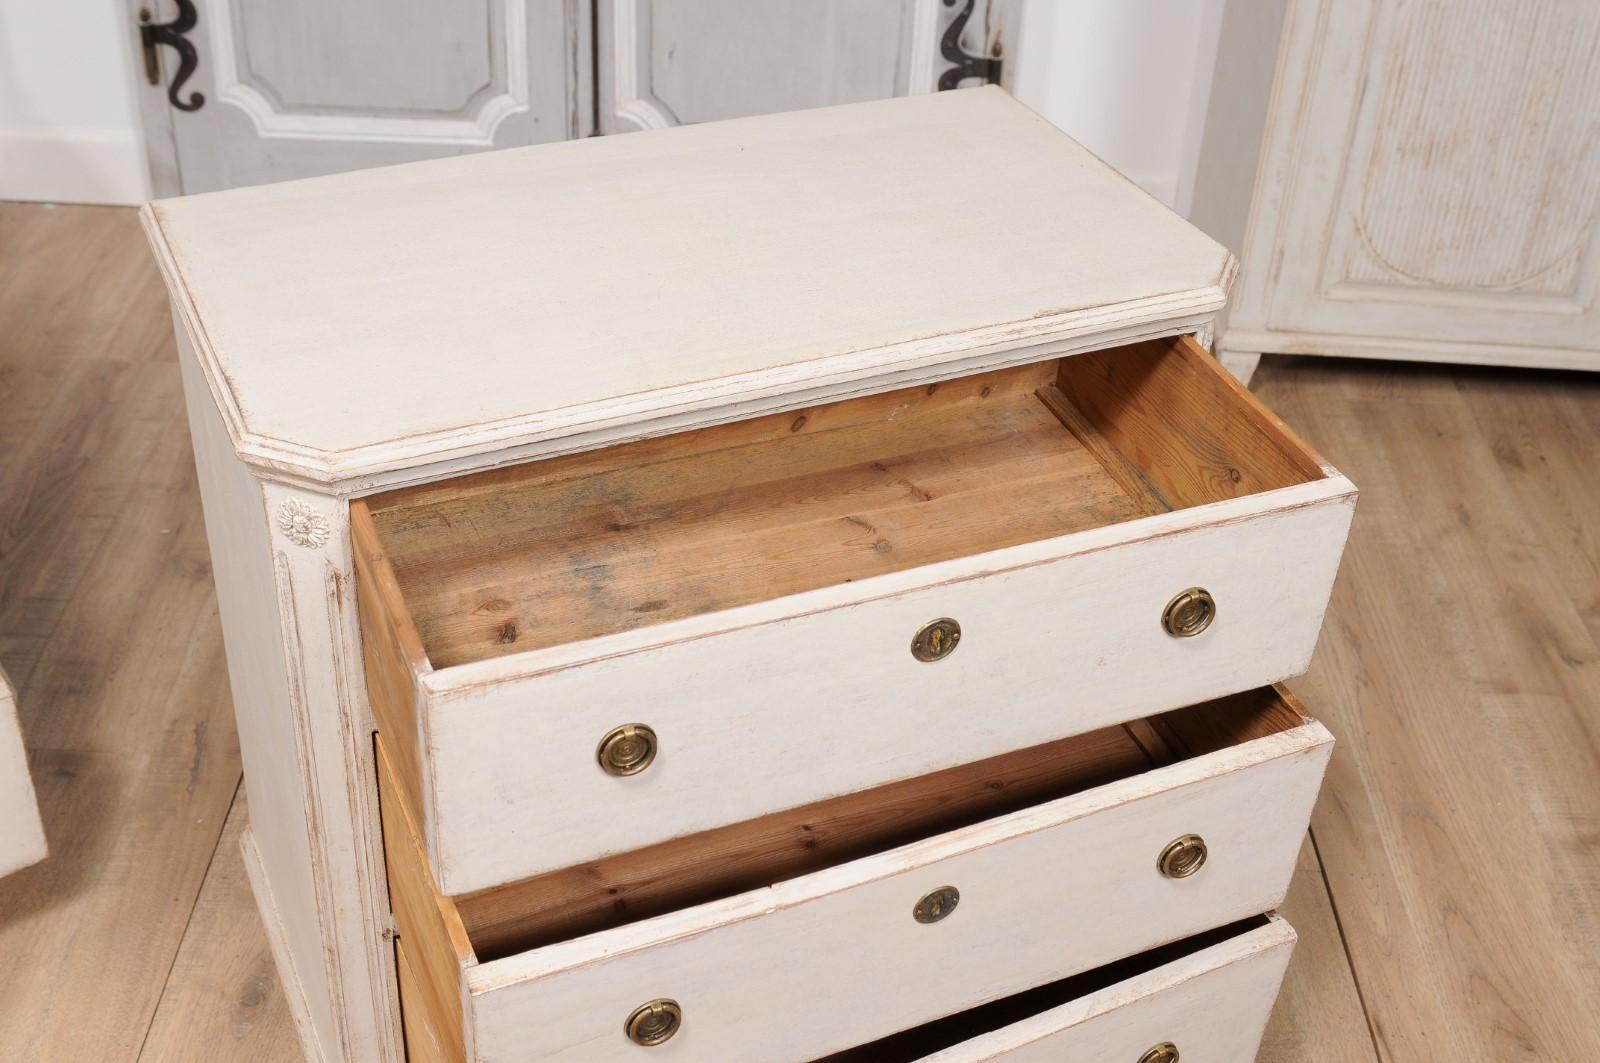 19th Century Swedish Gustavian Style Painted Three-Drawer Chests, a Pair For Sale 2